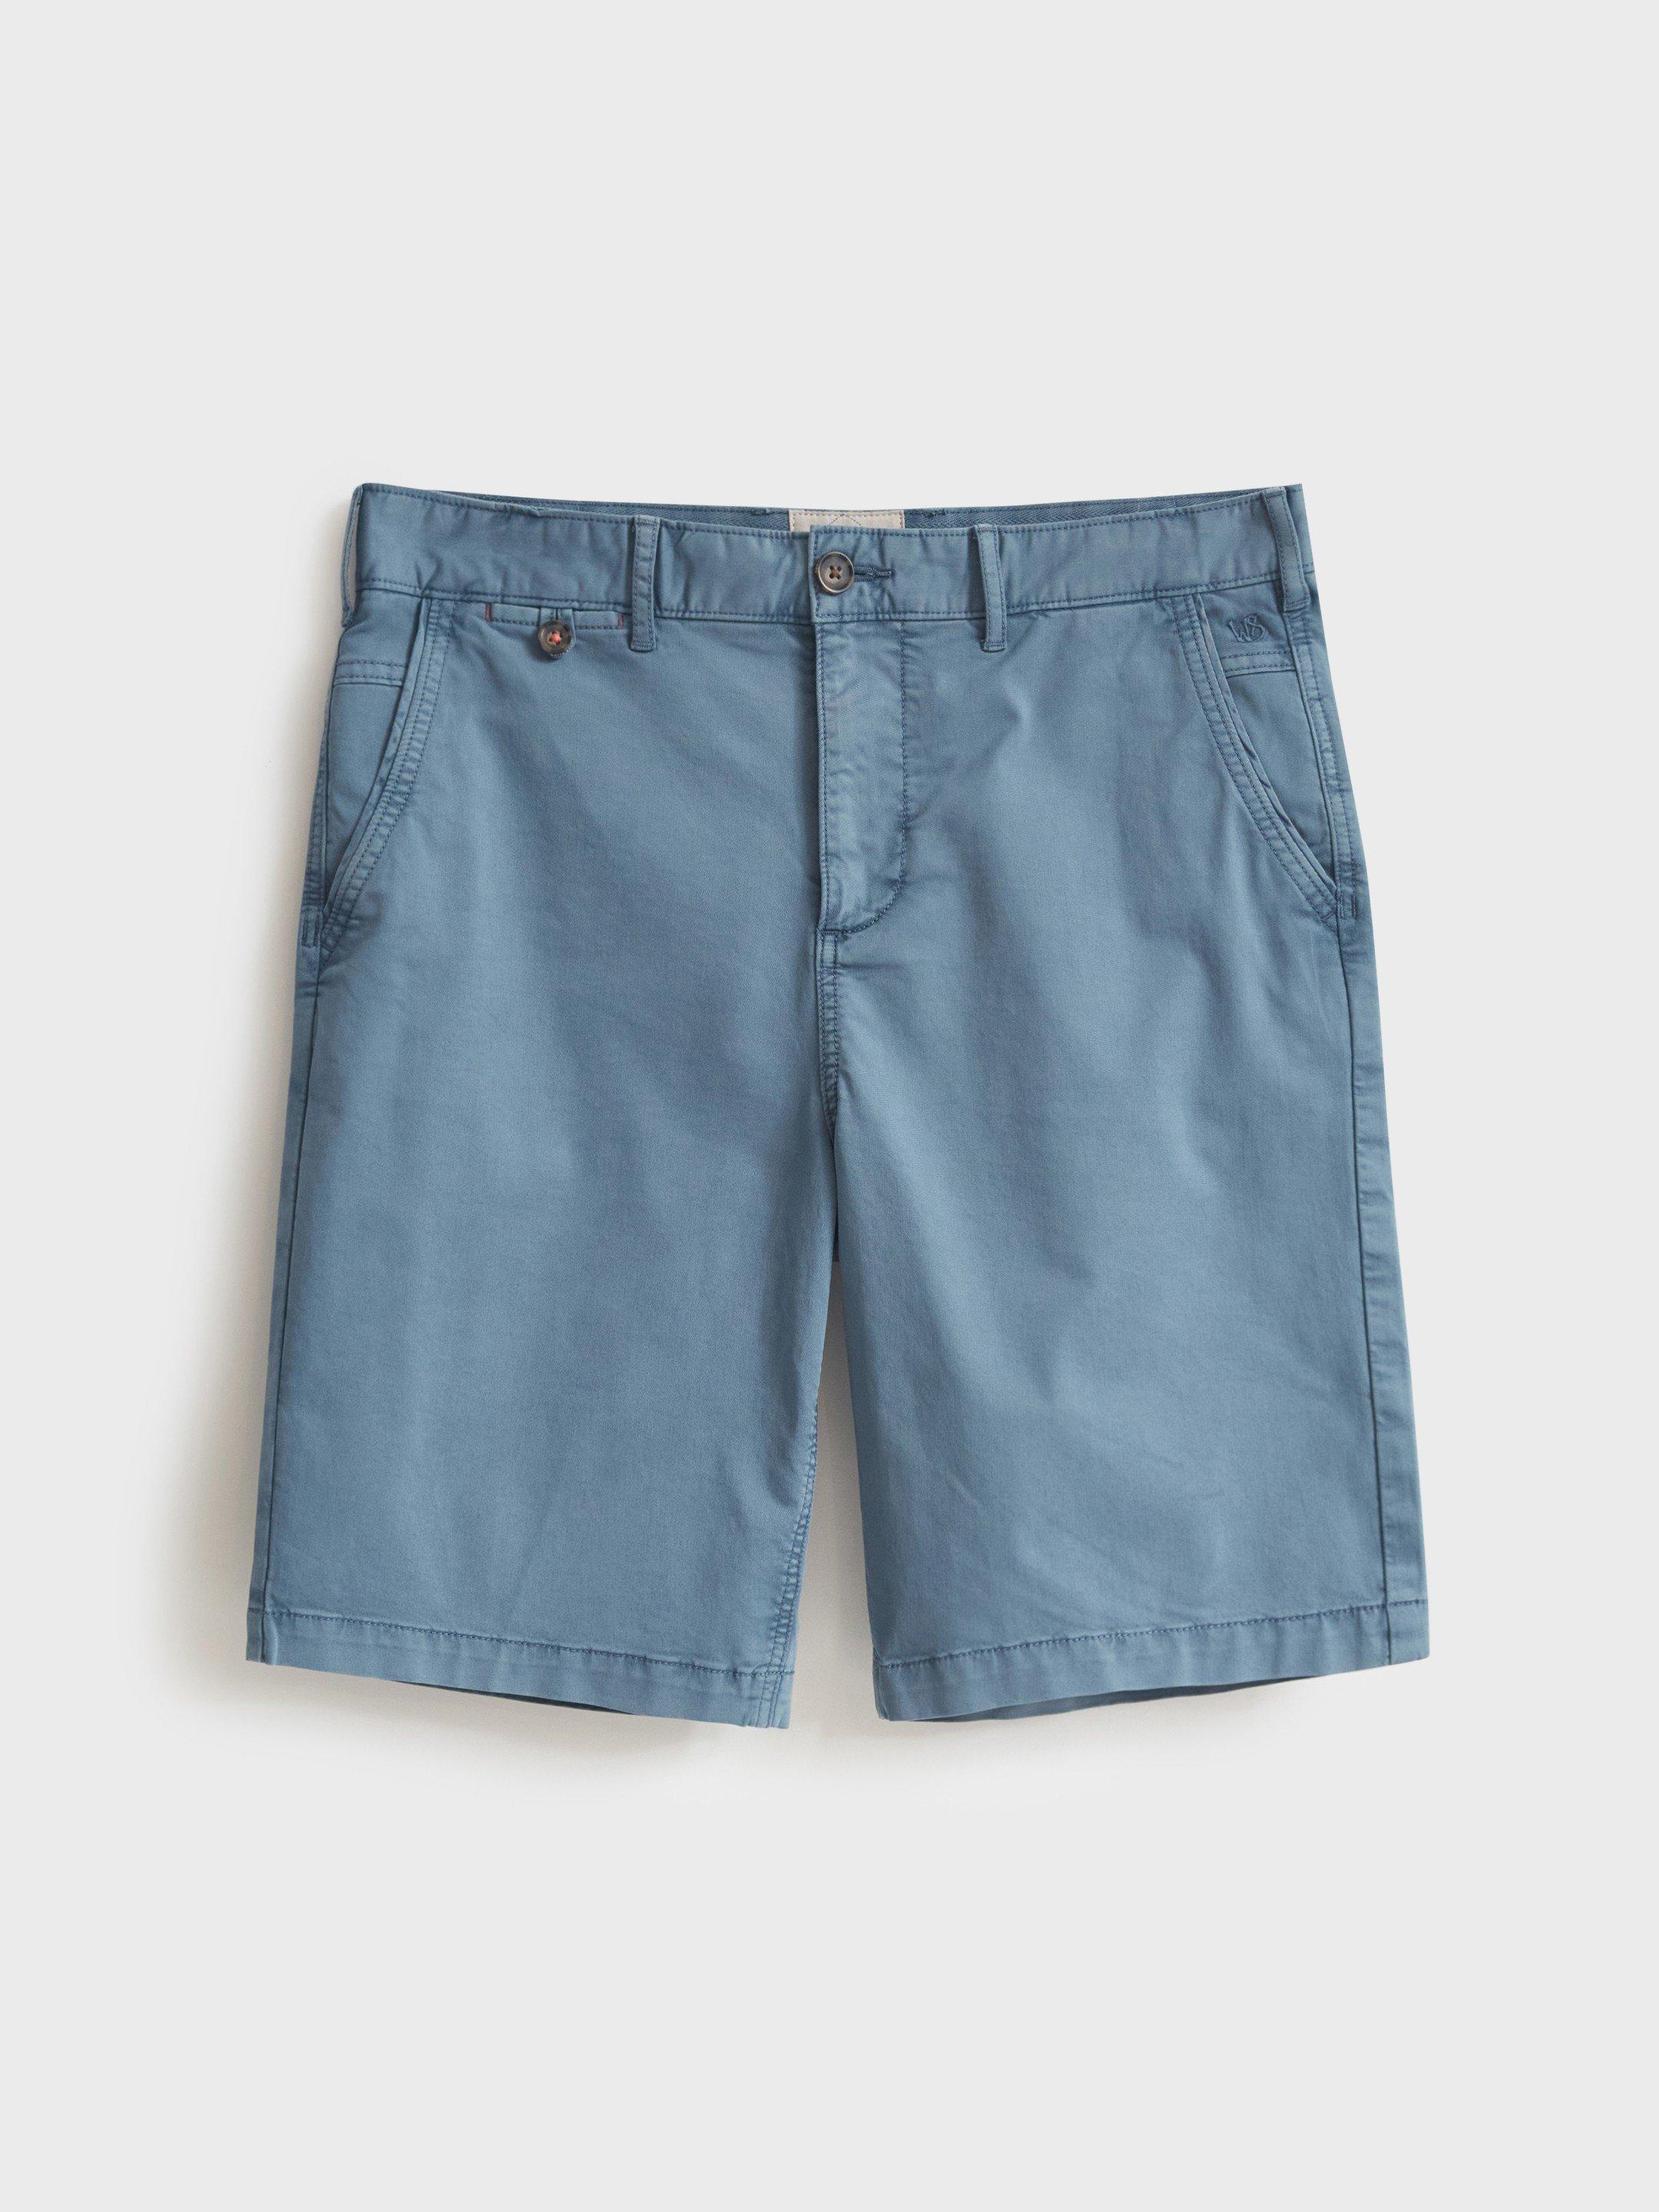 Sutton Organic Chino Shorts in MID BLUE - FLAT FRONT